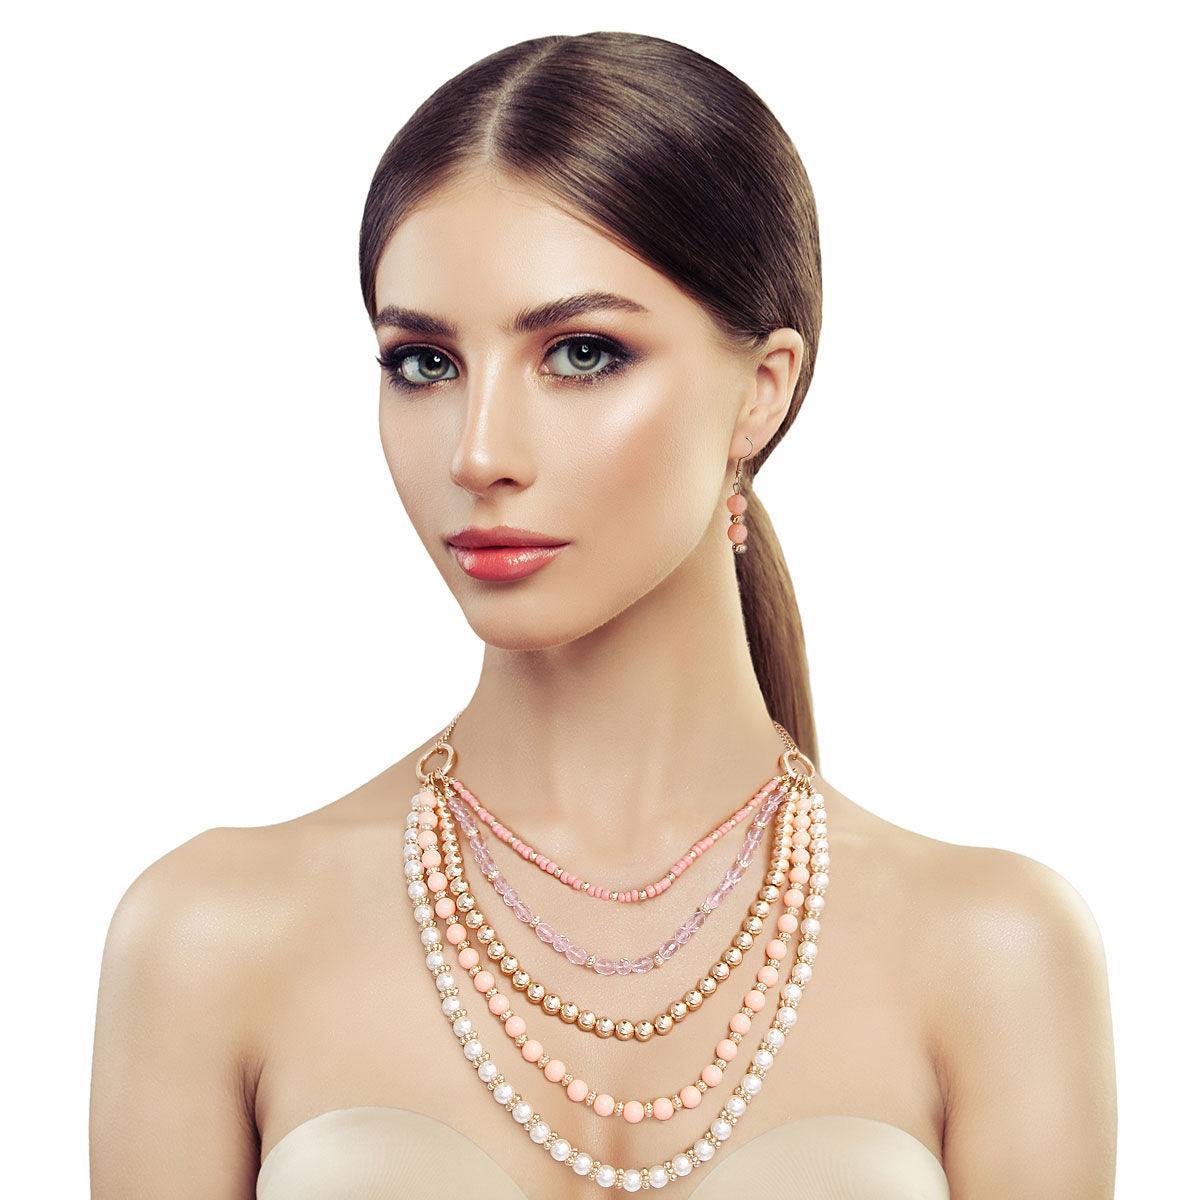 Stunning Pearl Beaded Jewelry Set - Upgrade Your Style Instantly!